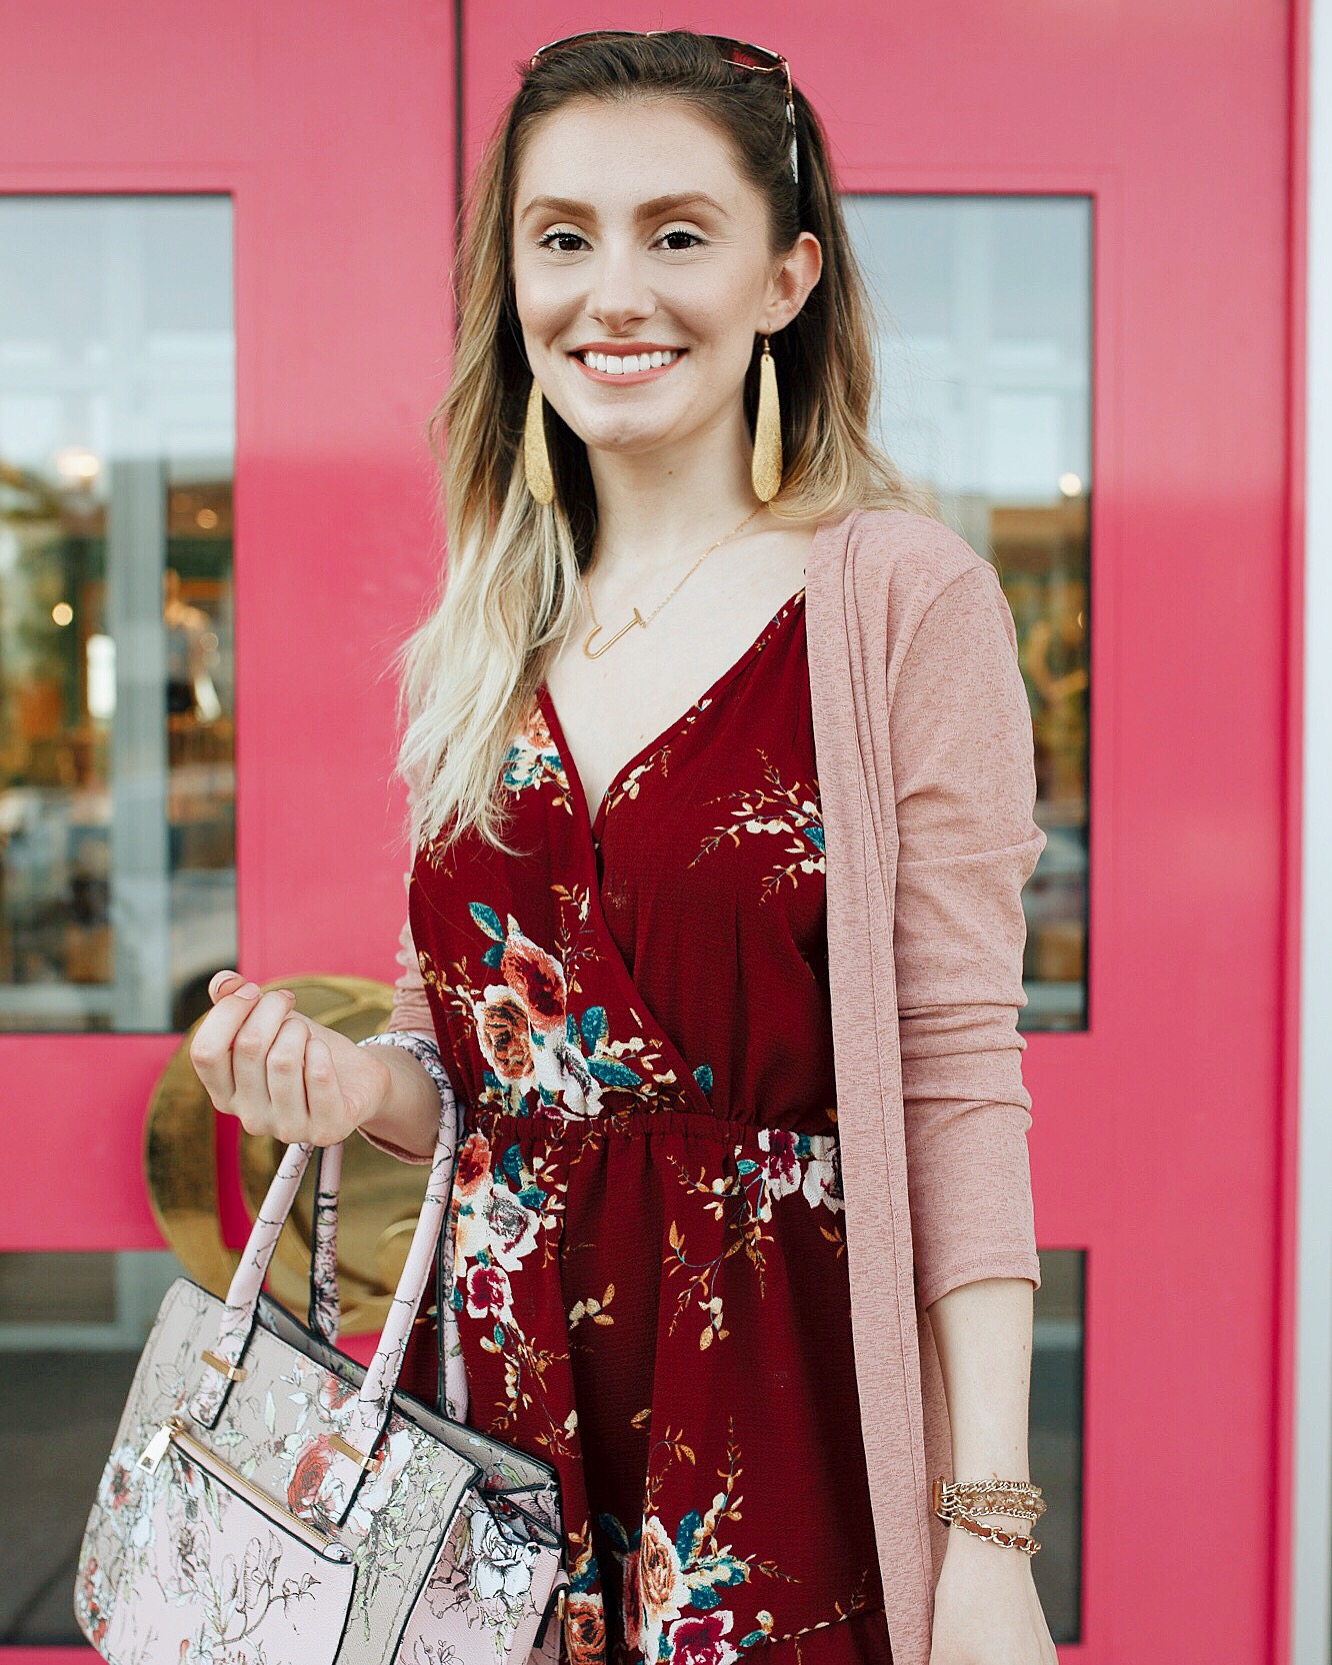 Summer to fall transition outfit by popular North Carolina fashion blogger Jessica Linn. Burgundy floral print romper from Copper Bloom, pink duster cardigan from Romwe, boots from Fergalicious by Fergie.